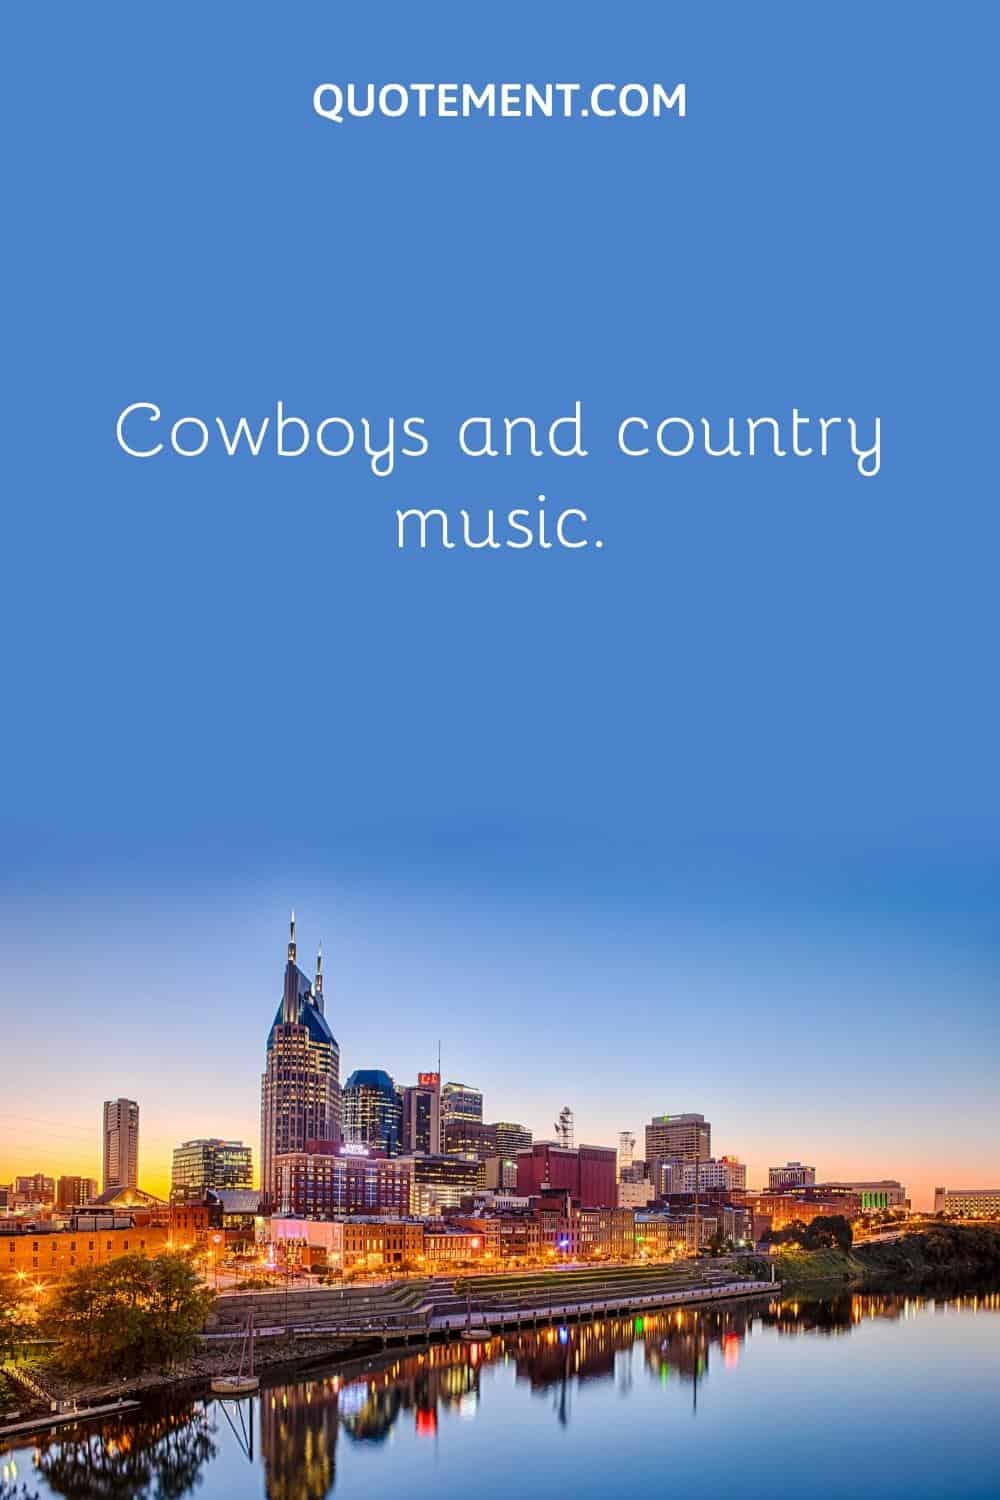 Cowboys and country music.